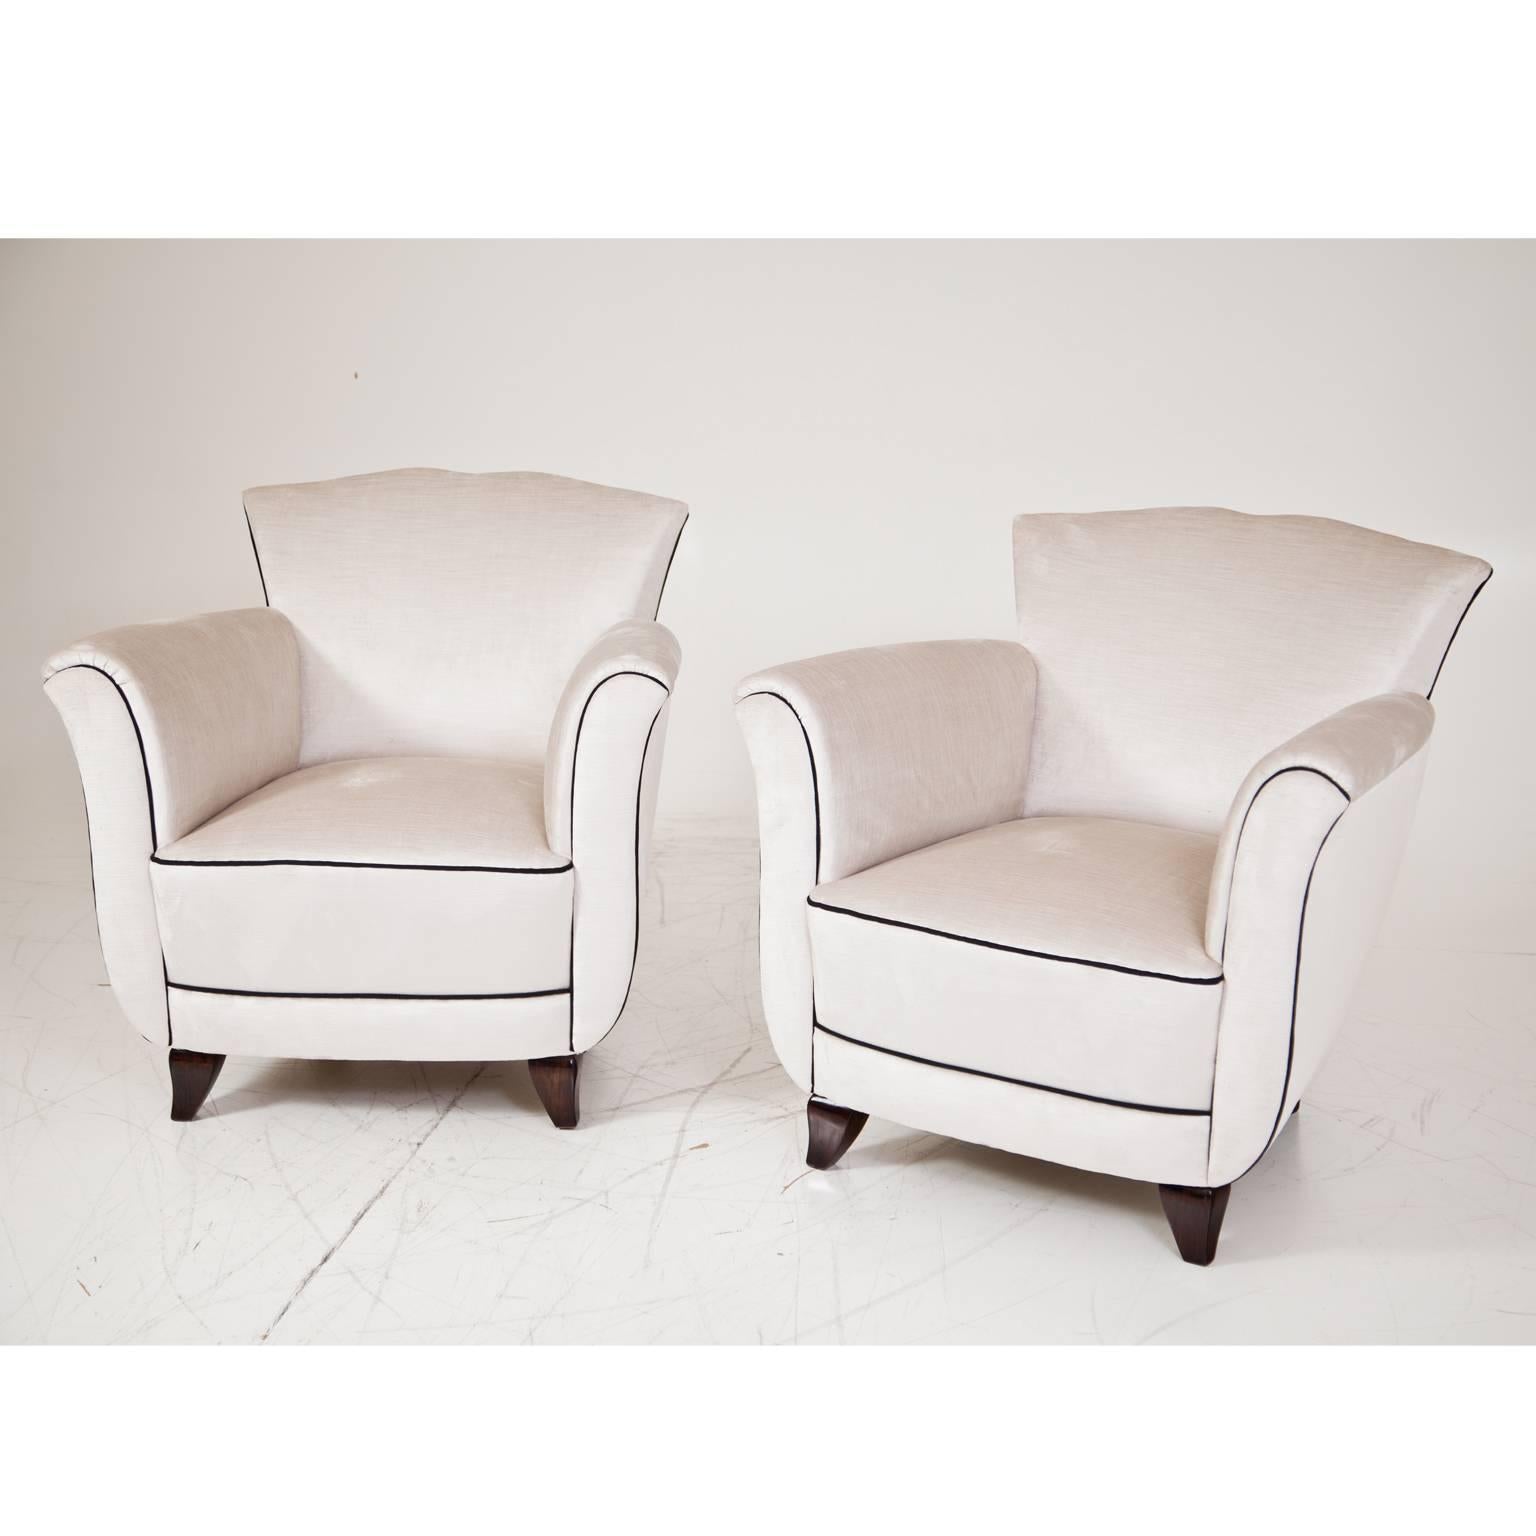 Pair of armchairs on low tapered legs with thickly upholstered seat. The white fabric is accentuated by a black trim, which emphasizes the very beautiful and unusual lip-shaped backrest.